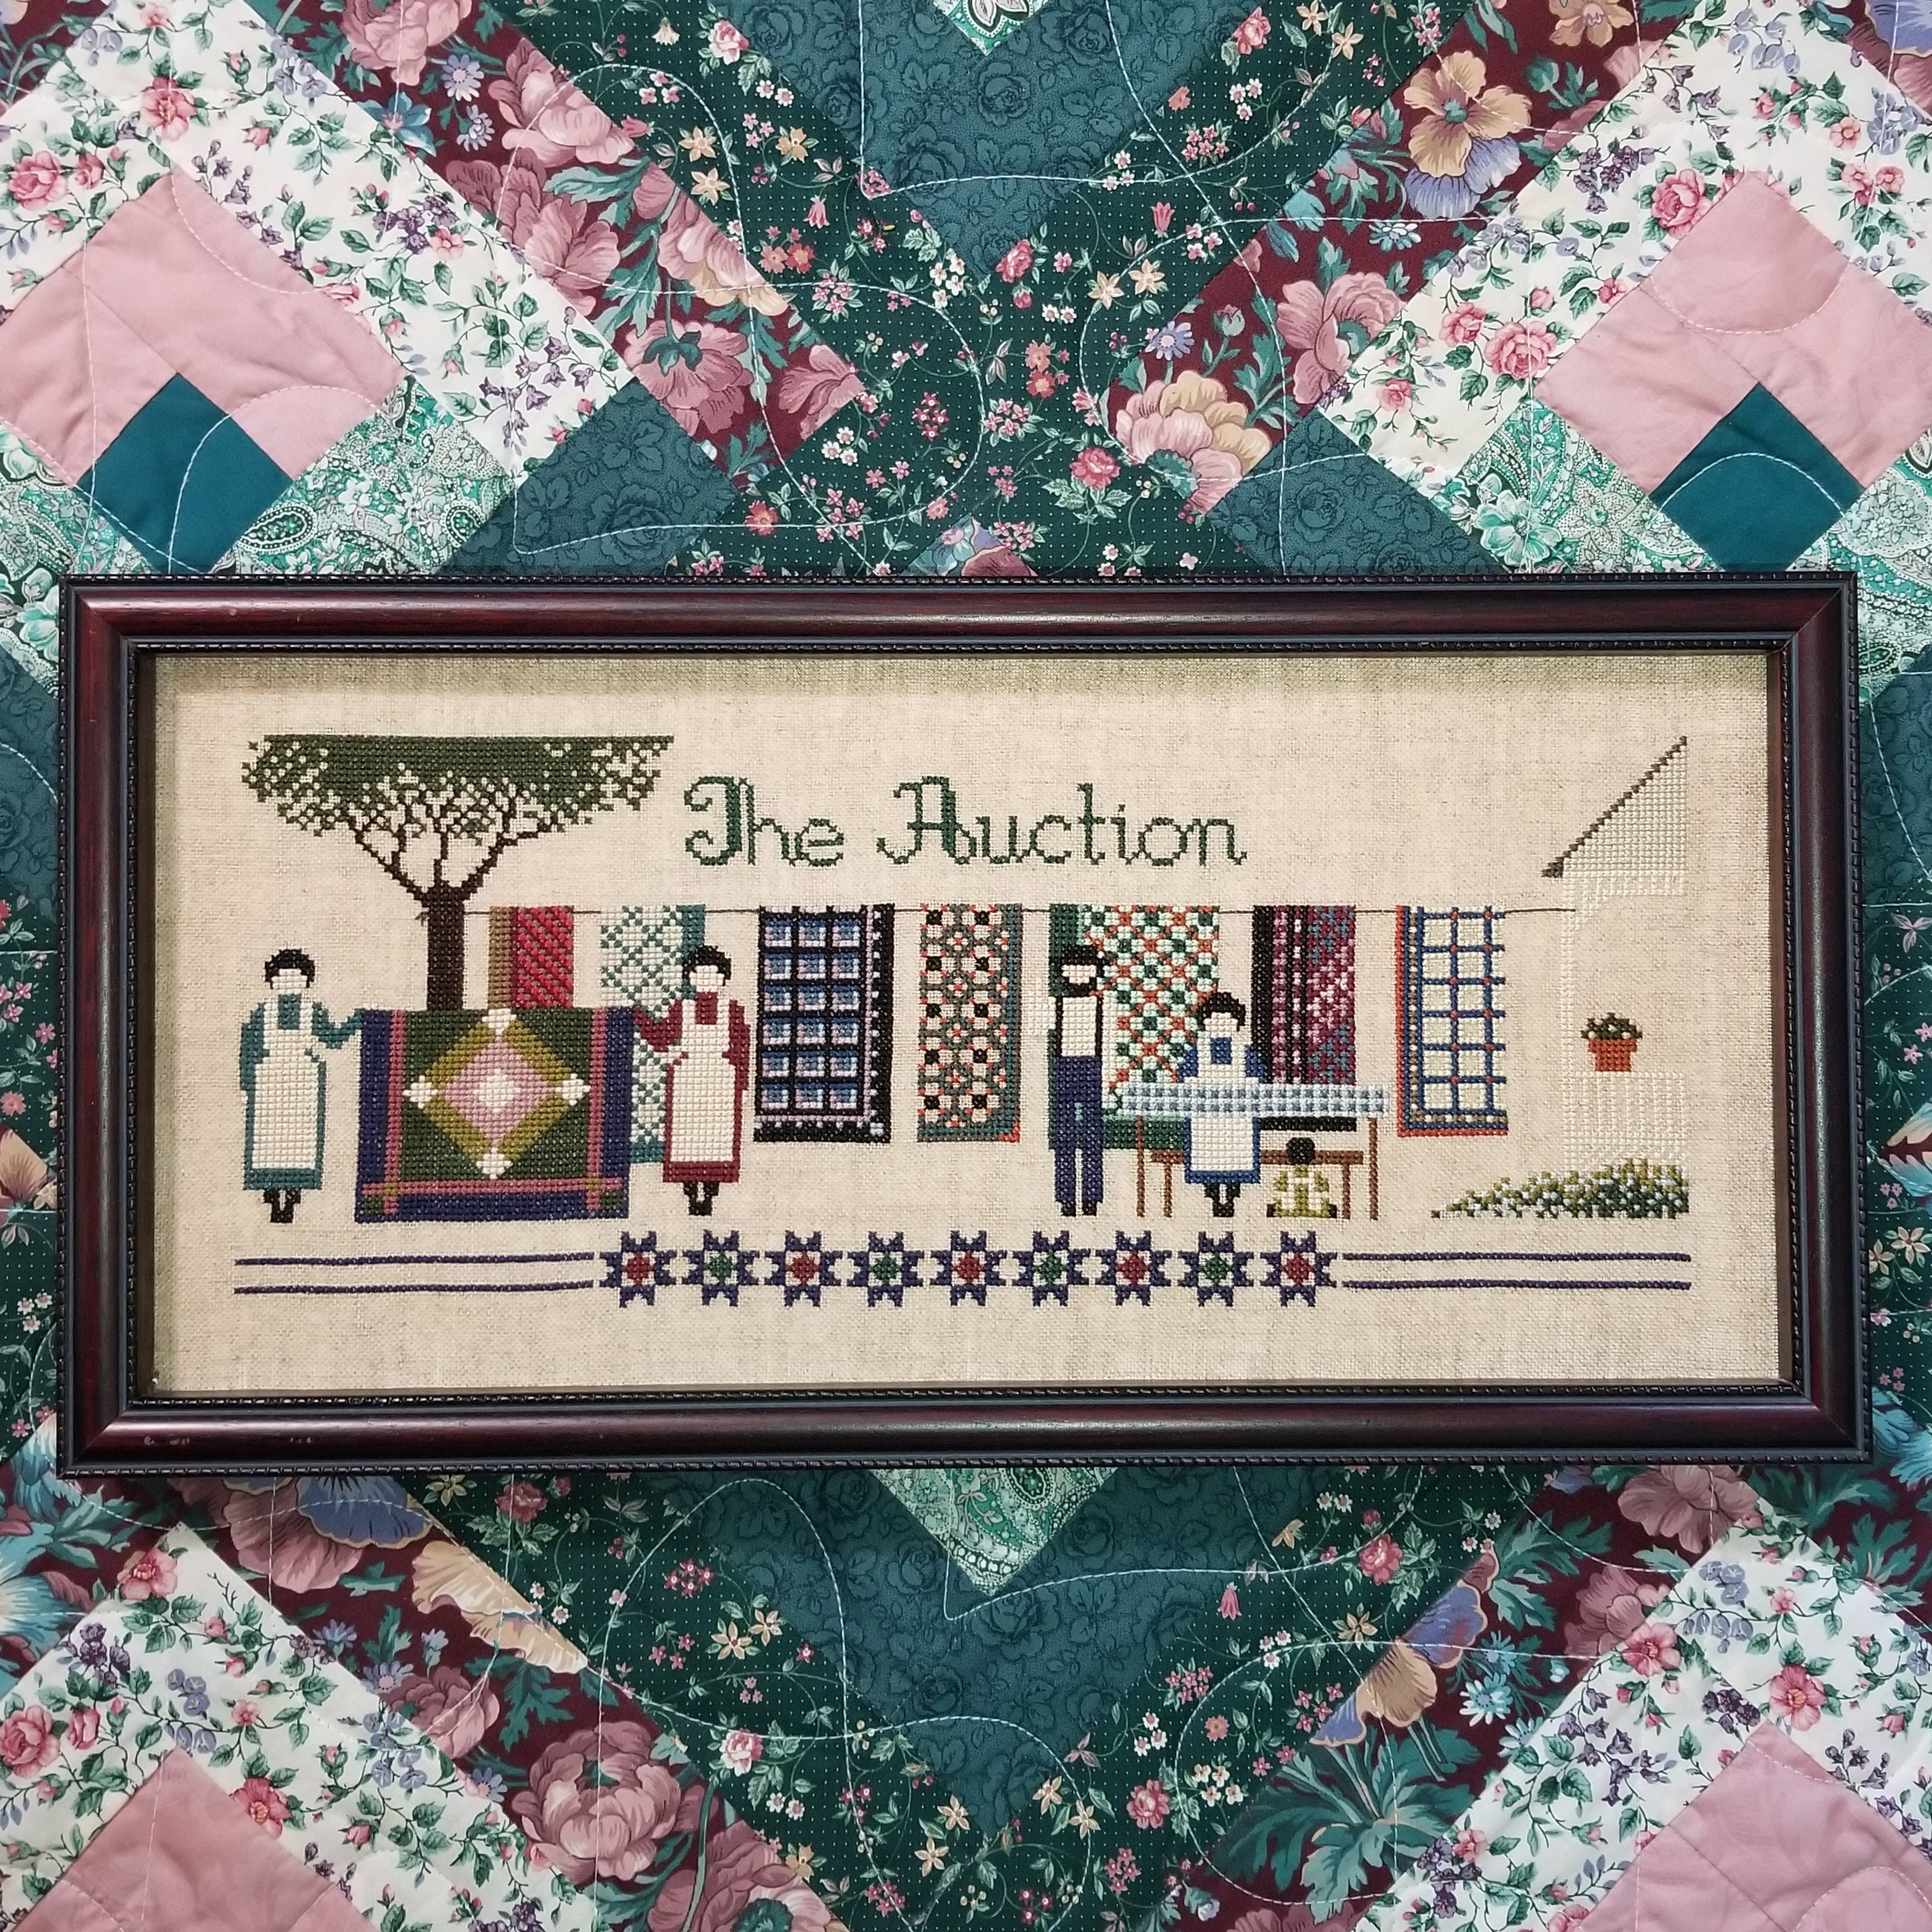 Completed Framed Counted Cross Stitch Picture Saying the Auction Showing  Amish Quilts on a Clothesline With Amish Folk 